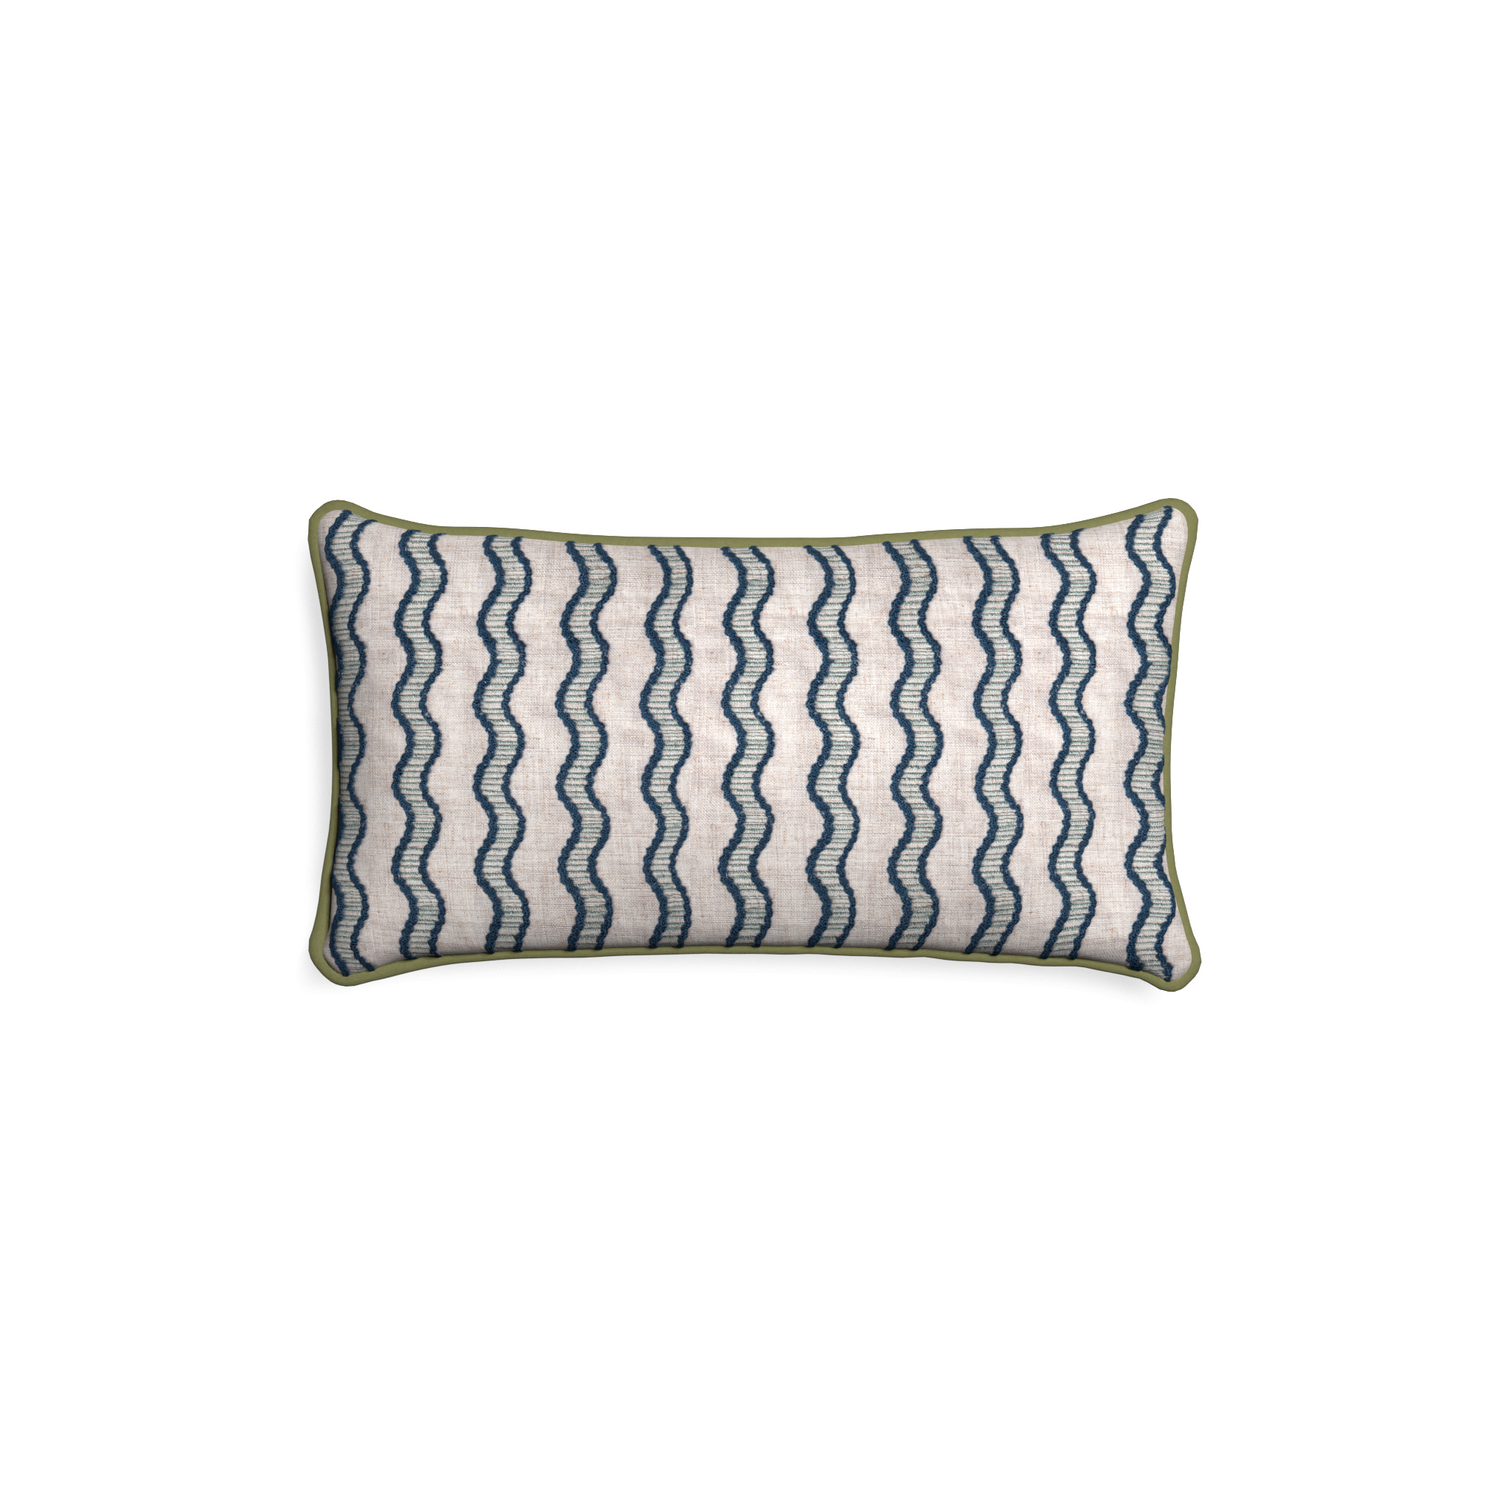 Petite-lumbar beatrice custom embroidered wavepillow with moss piping on white background